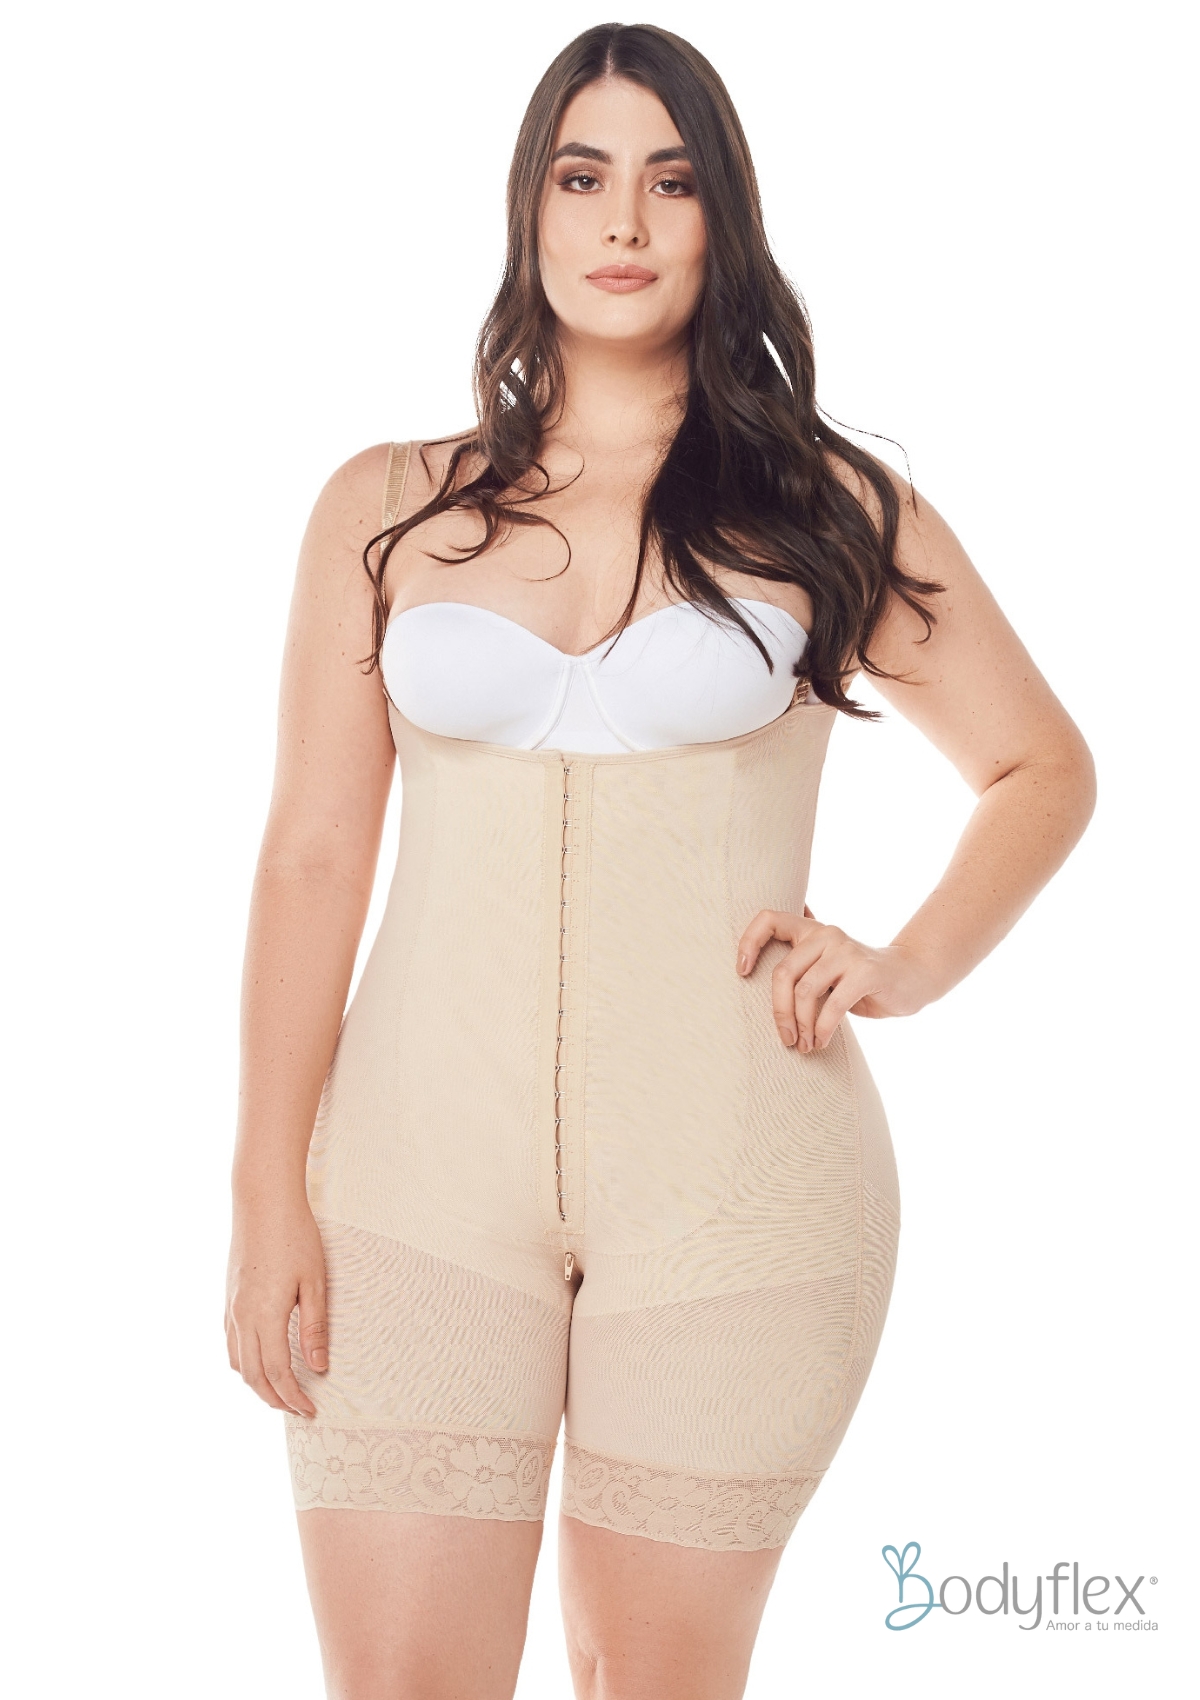 Electra Plus Size High Compression Shaper with Butt Lifter - Zeta